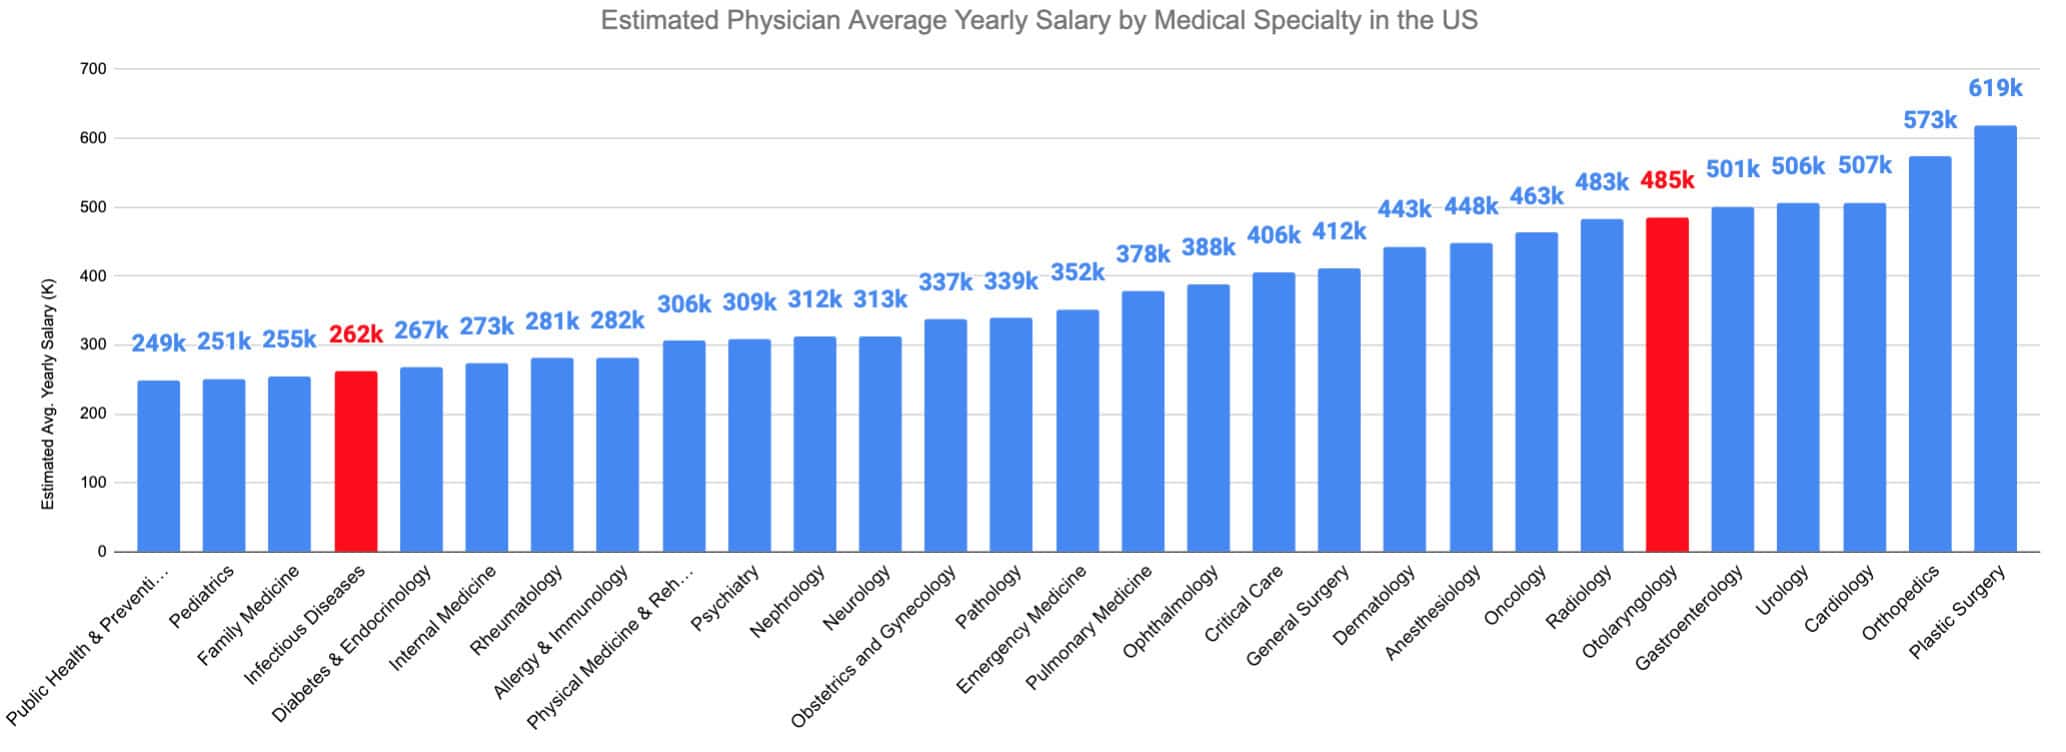 Otolaryngology vs. Infectious Disease Estimated Physician Average Yearly Salary by Medical Specialty in the US